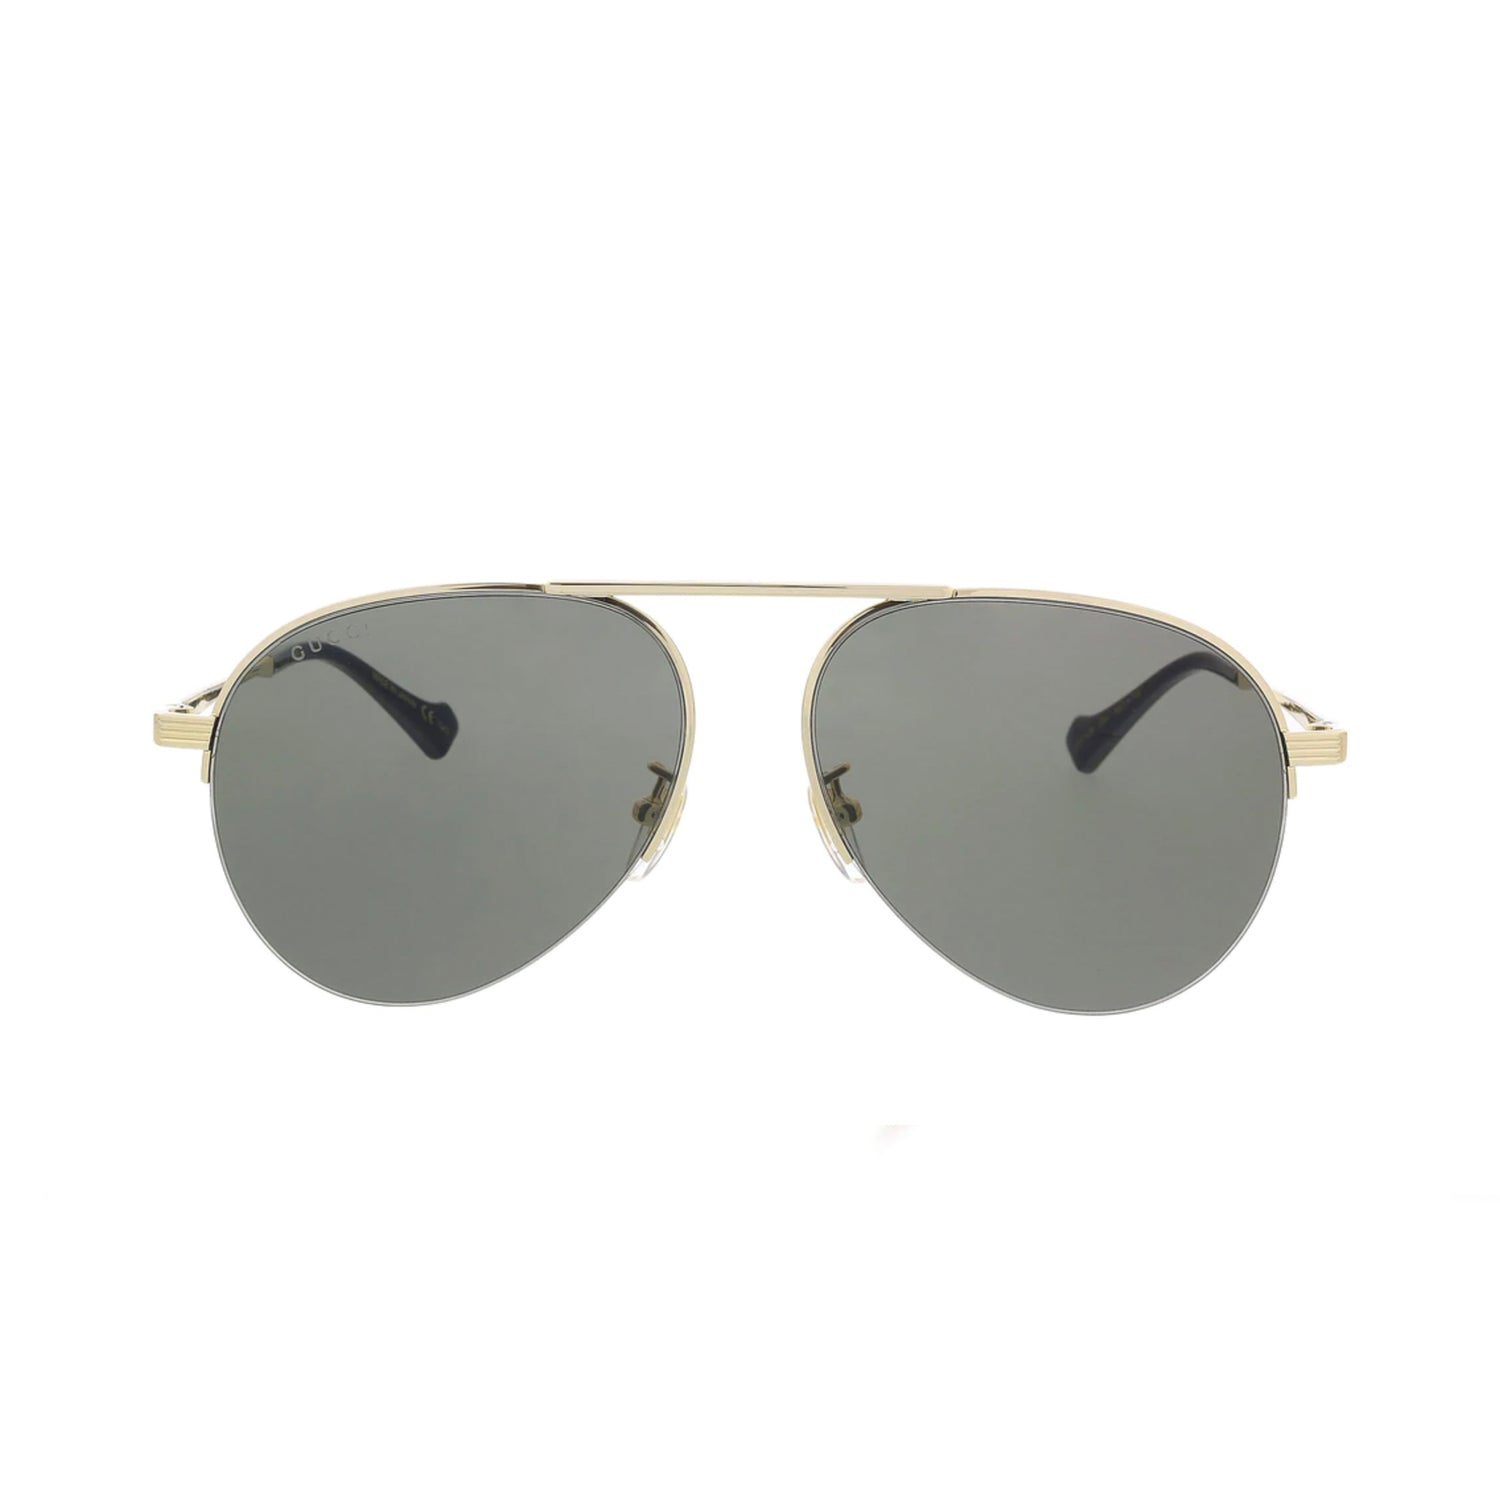 Gucci Fashion MSRP $495. An aviator silhouette updates the look of oversized Italian-crafted sunglasses finished with logo detailing on the arm